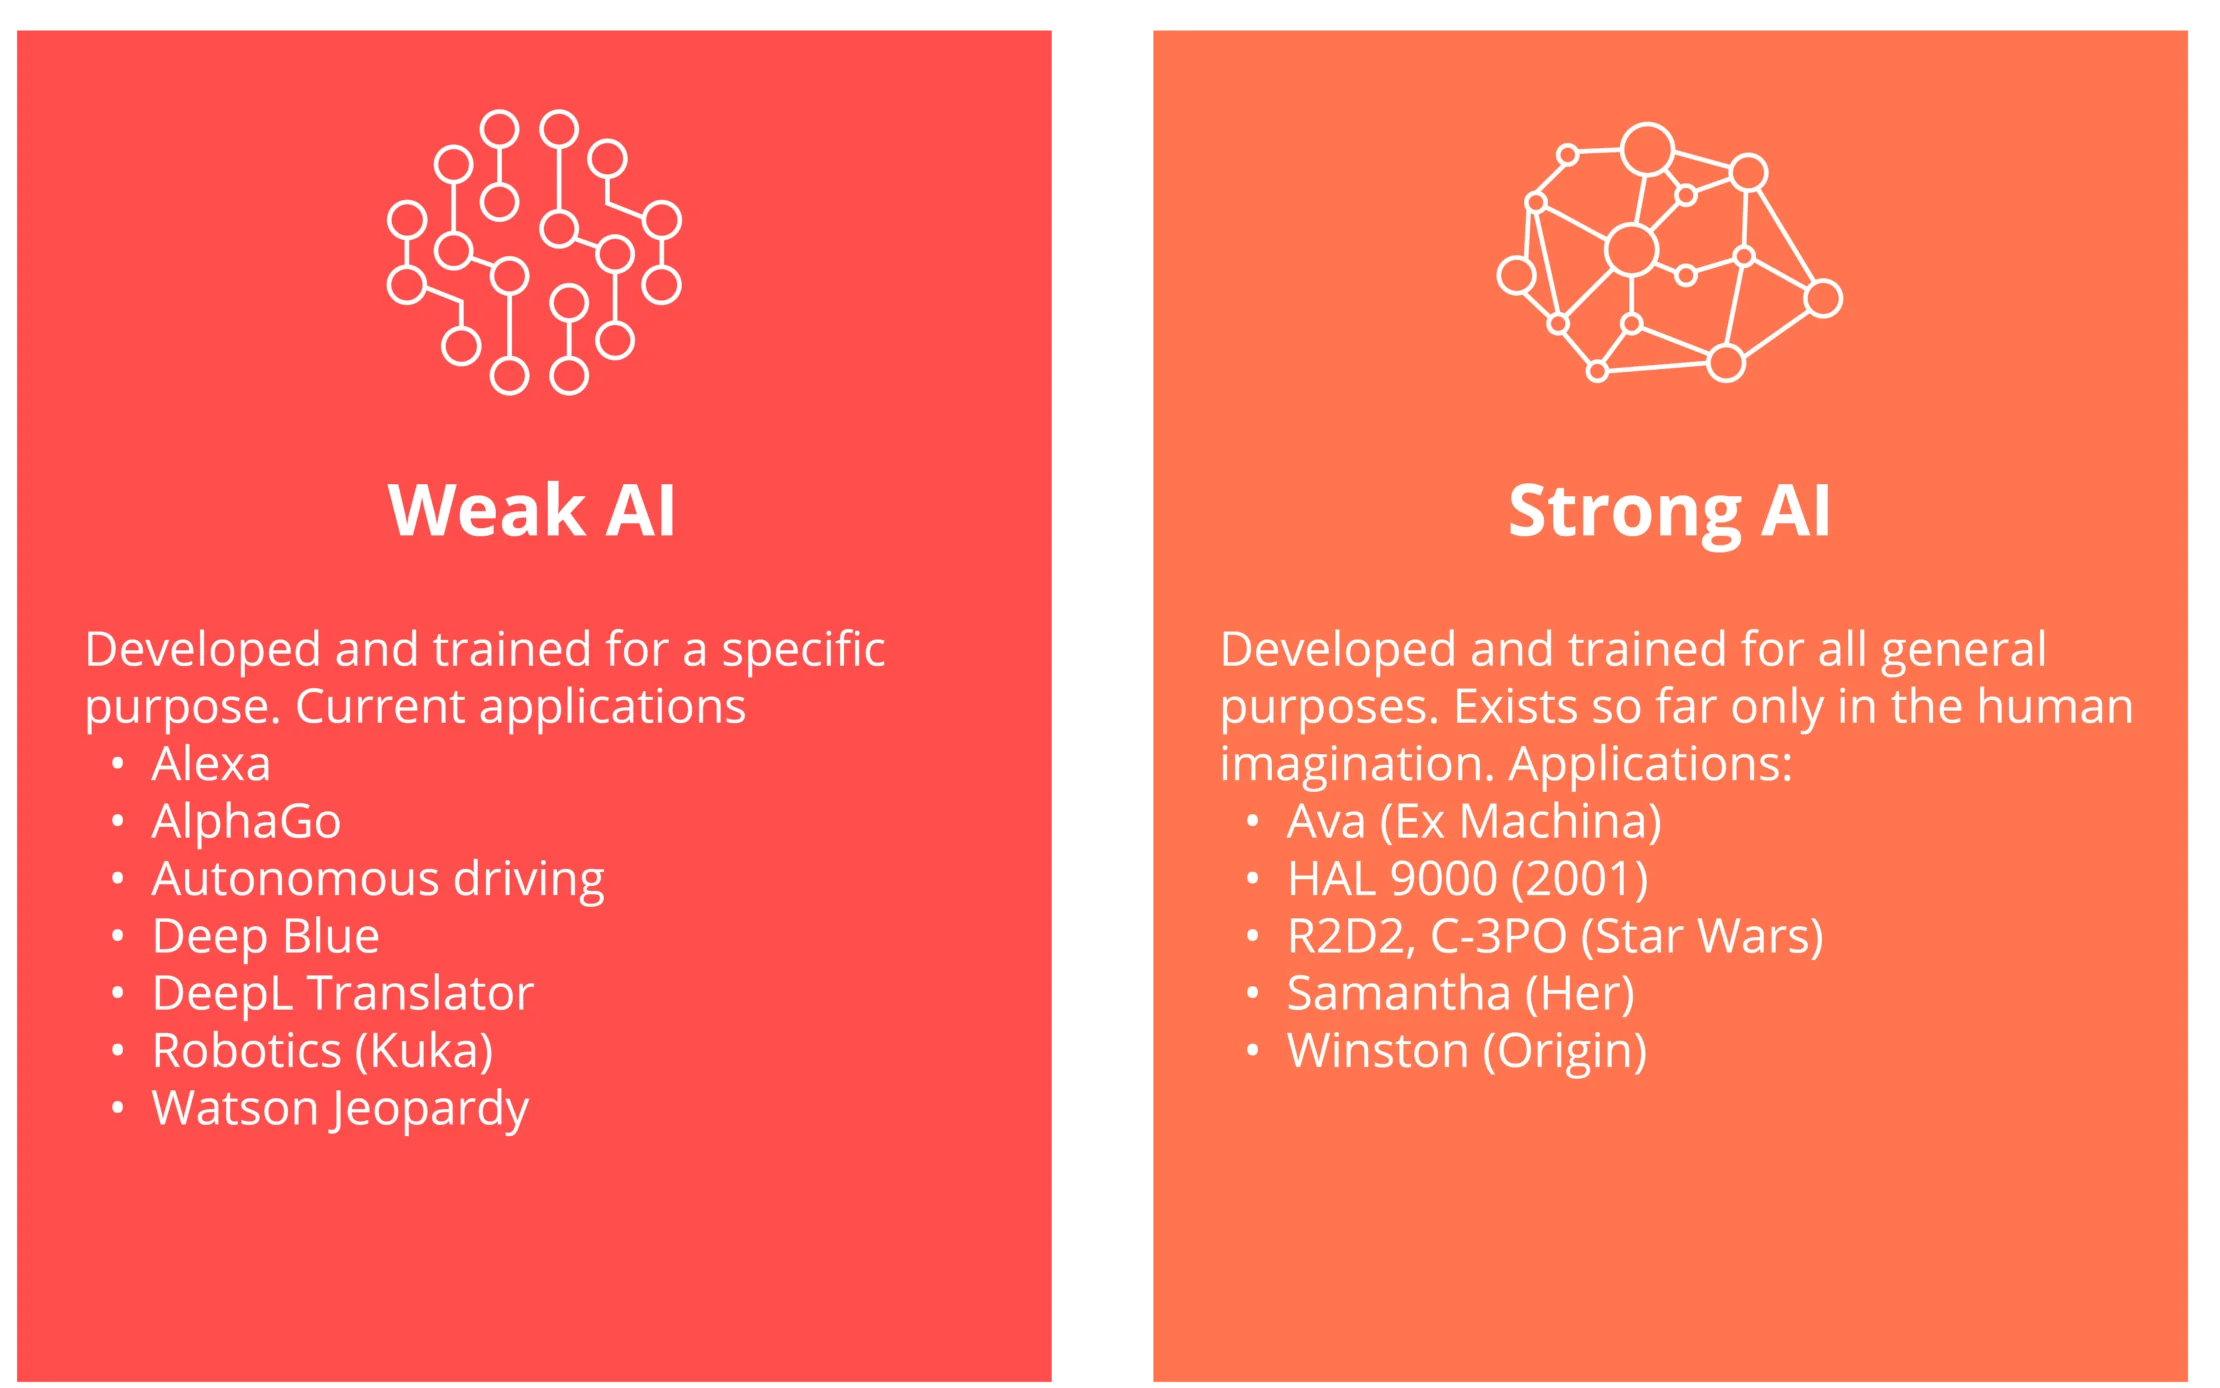 This chart contrasts strong and weak AI.